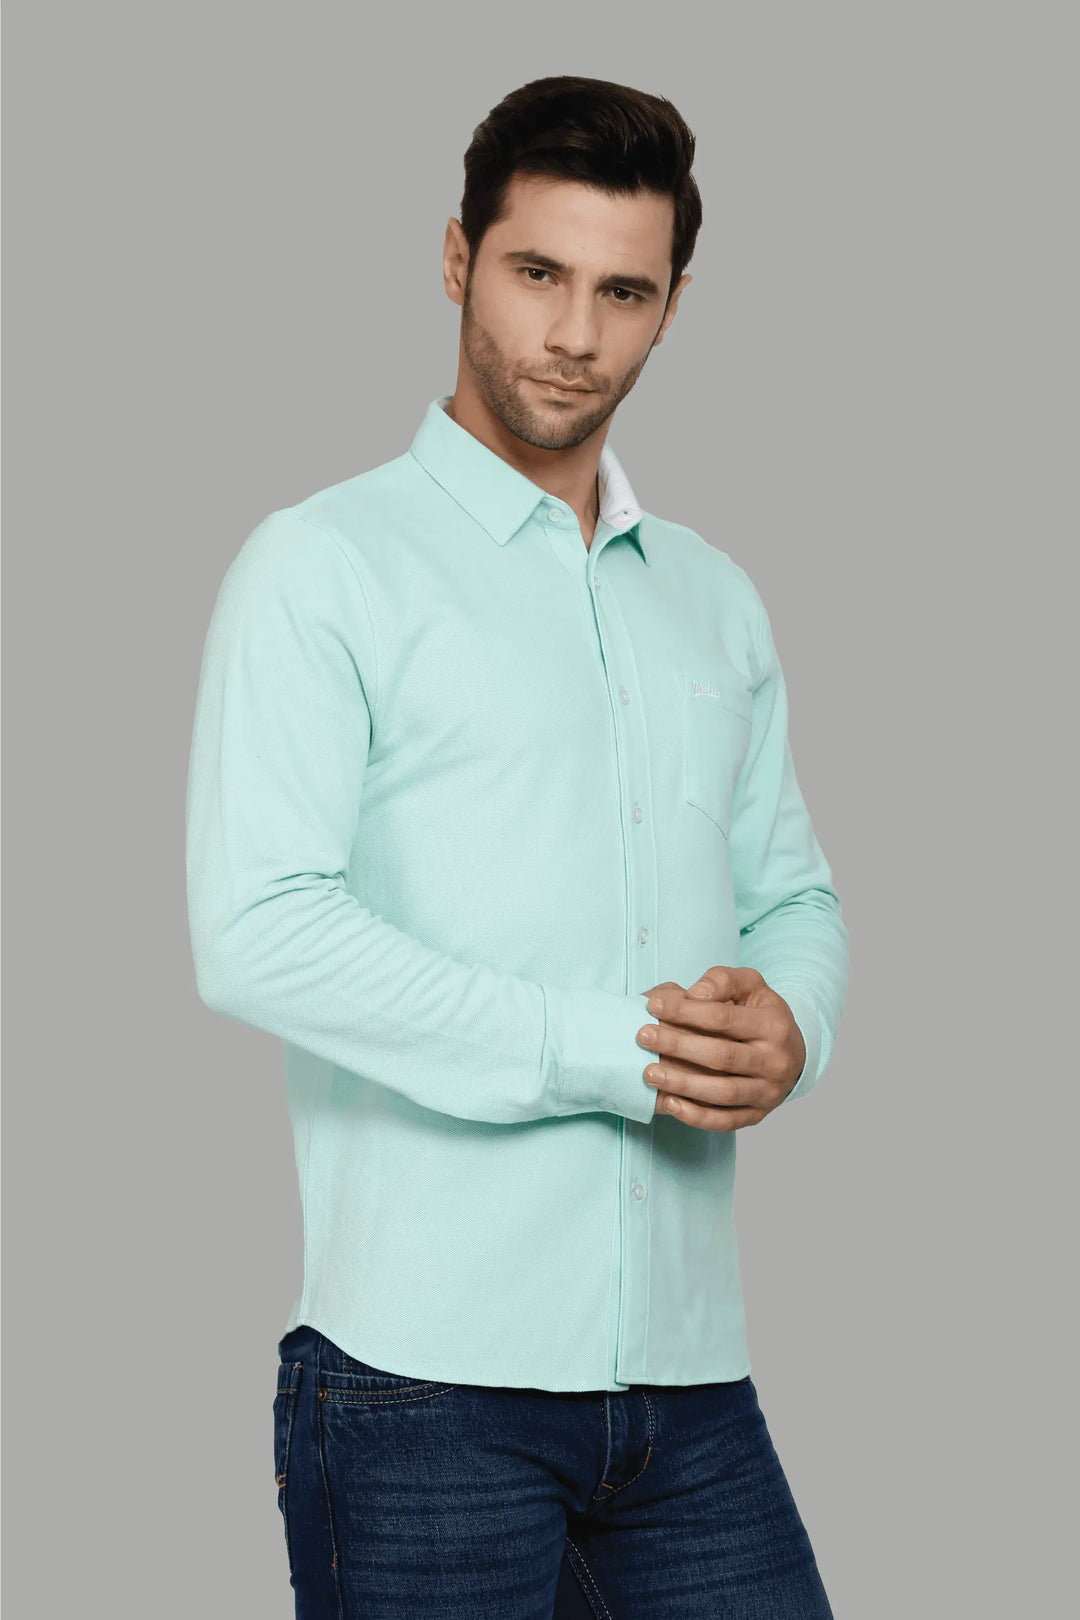 Best party wear full Sleeve Polo shirt in mens fashion . And it's conmfortable and perfect look in reasonable price.